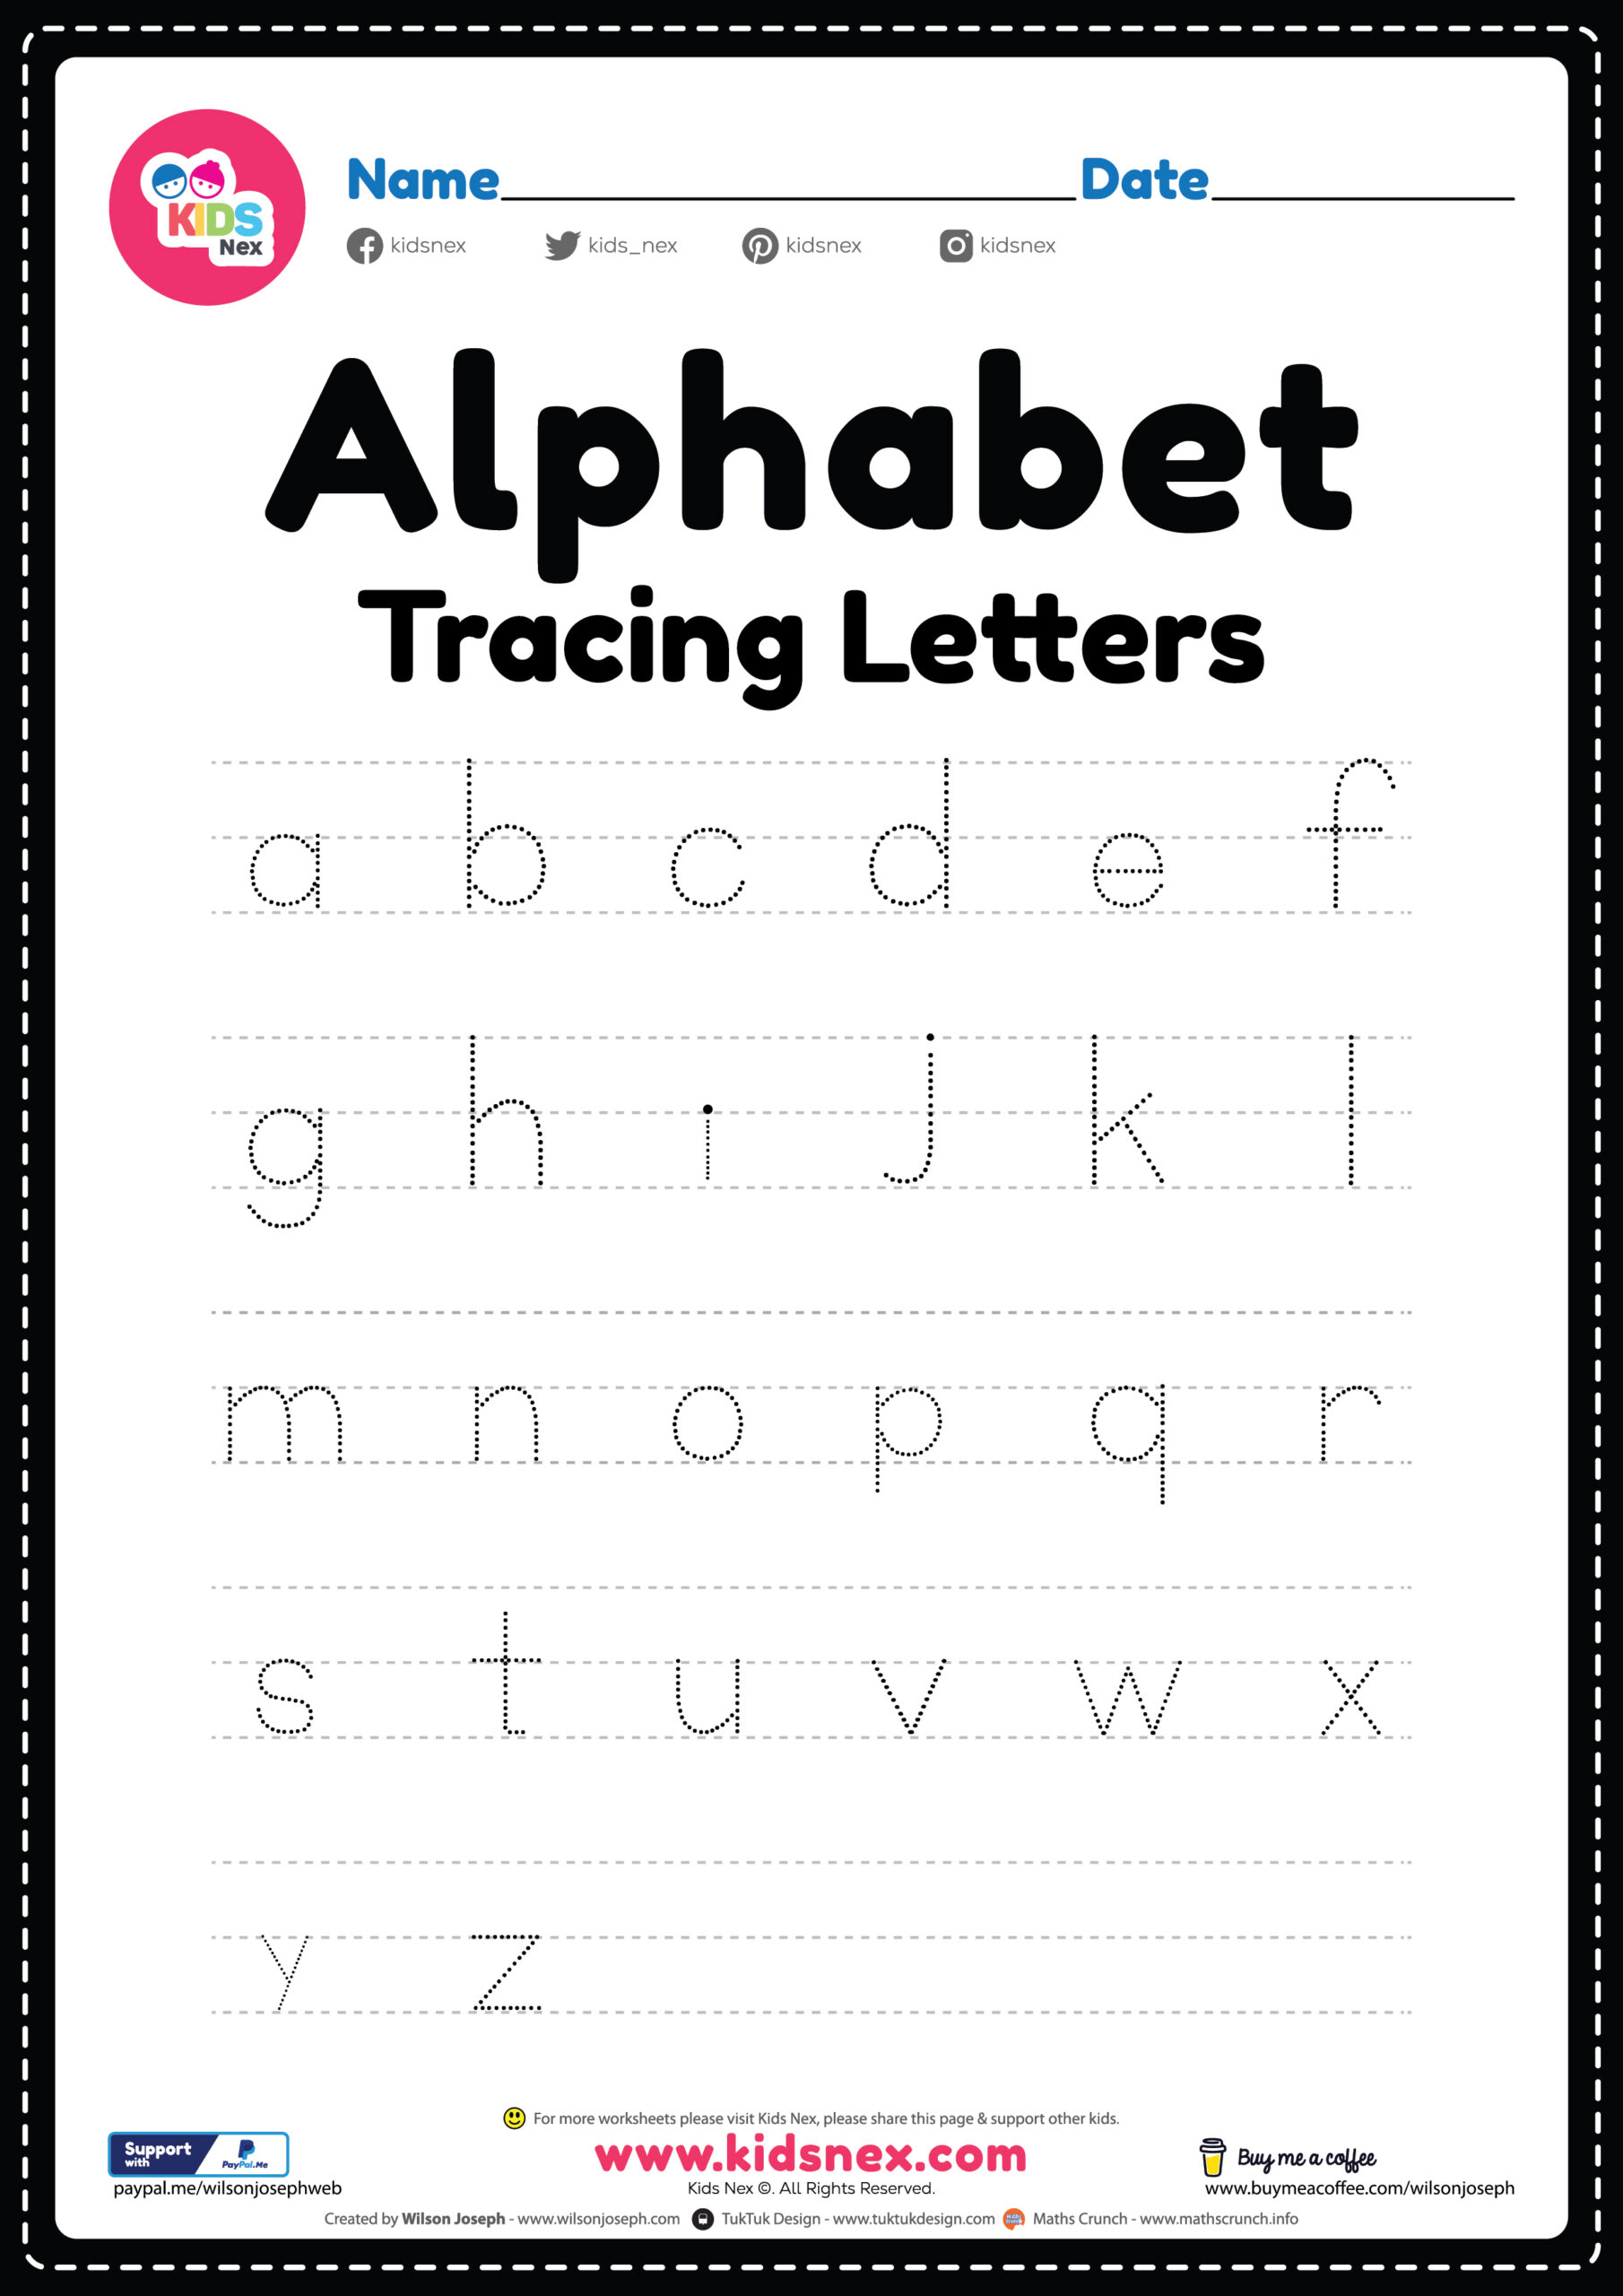 Tracing worksheet of Alphabet letters Free Printable PDF